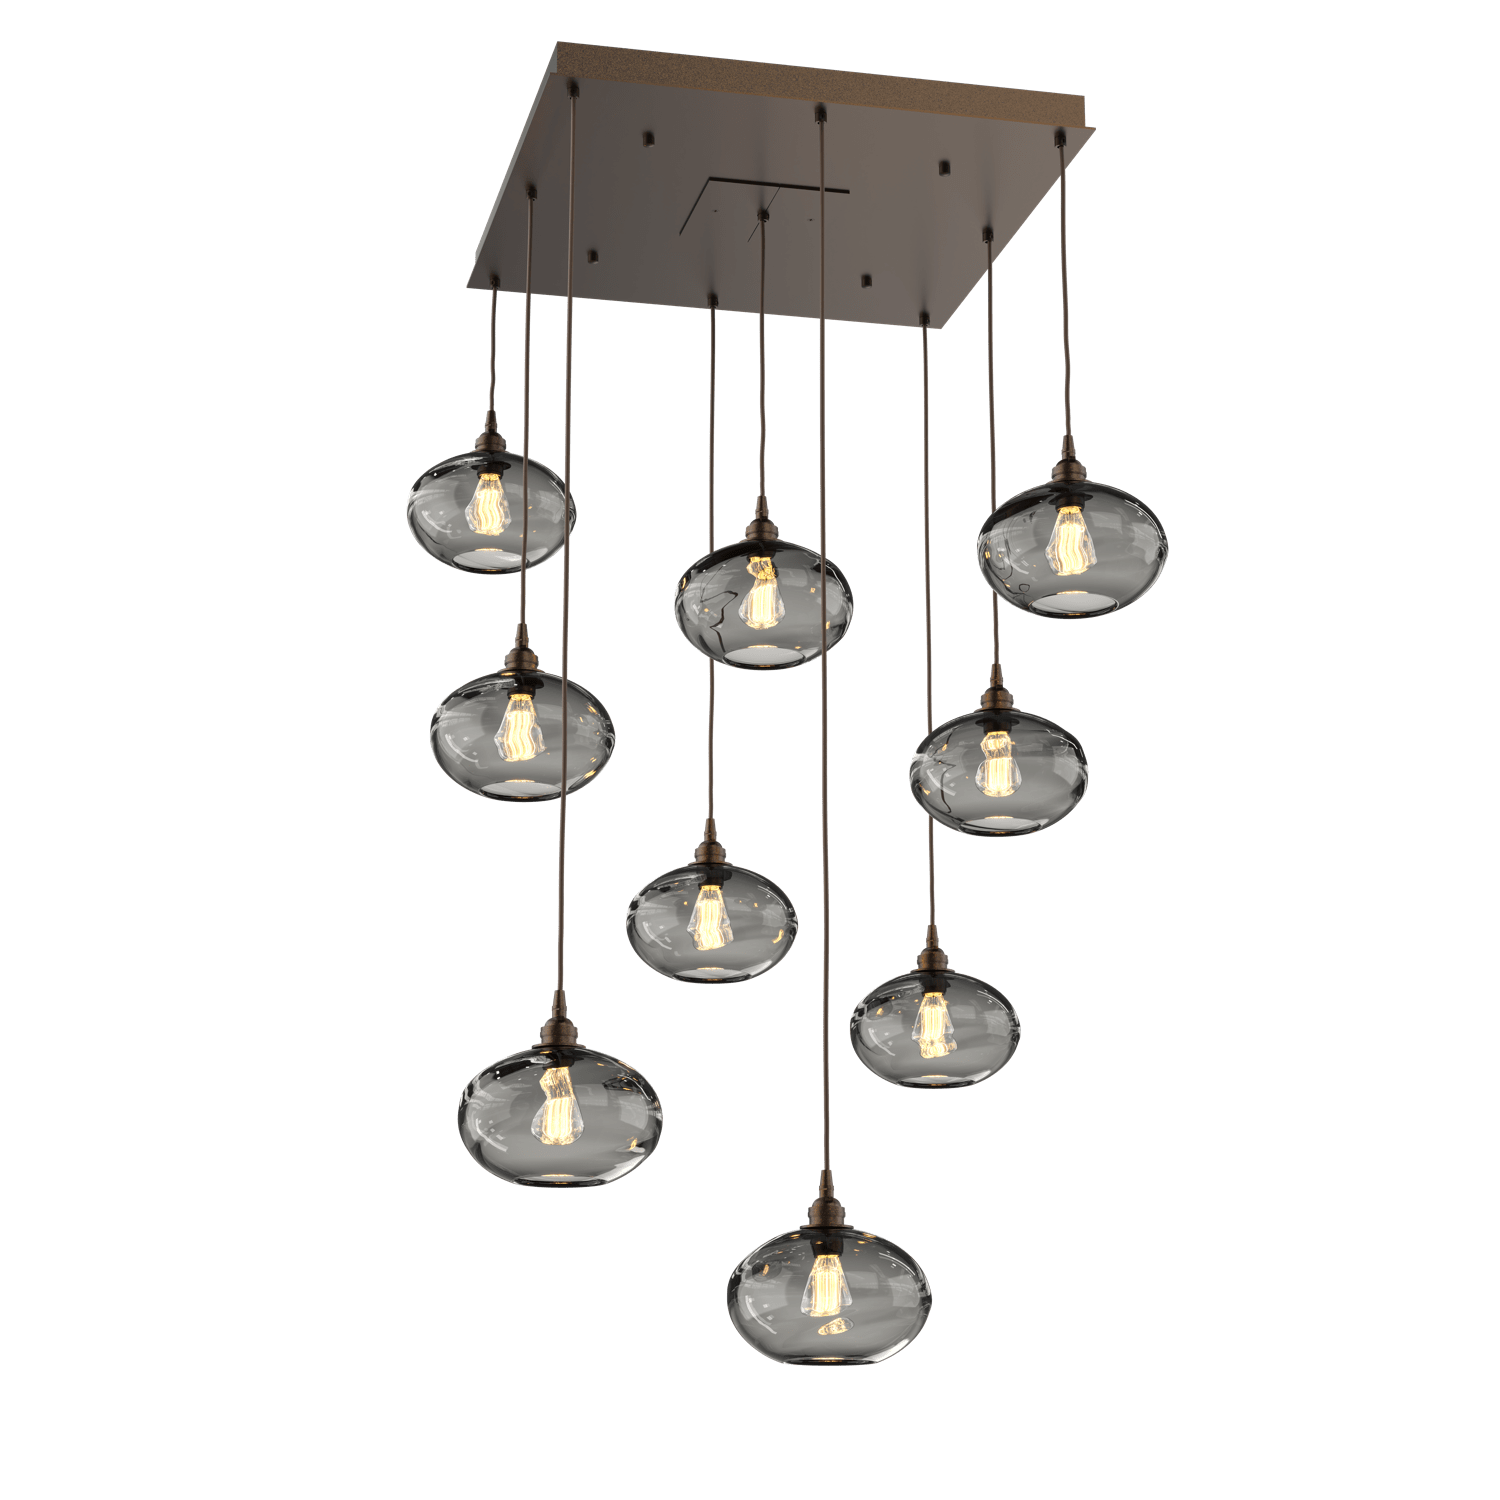 CHB0036-09-FB-OS-Hammerton-Studio-Optic-Blown-Glass-Coppa-9-light-square-pendant-chandelier-with-flat-bronze-finish-and-optic-smoke-blown-glass-shades-and-incandescent-lamping